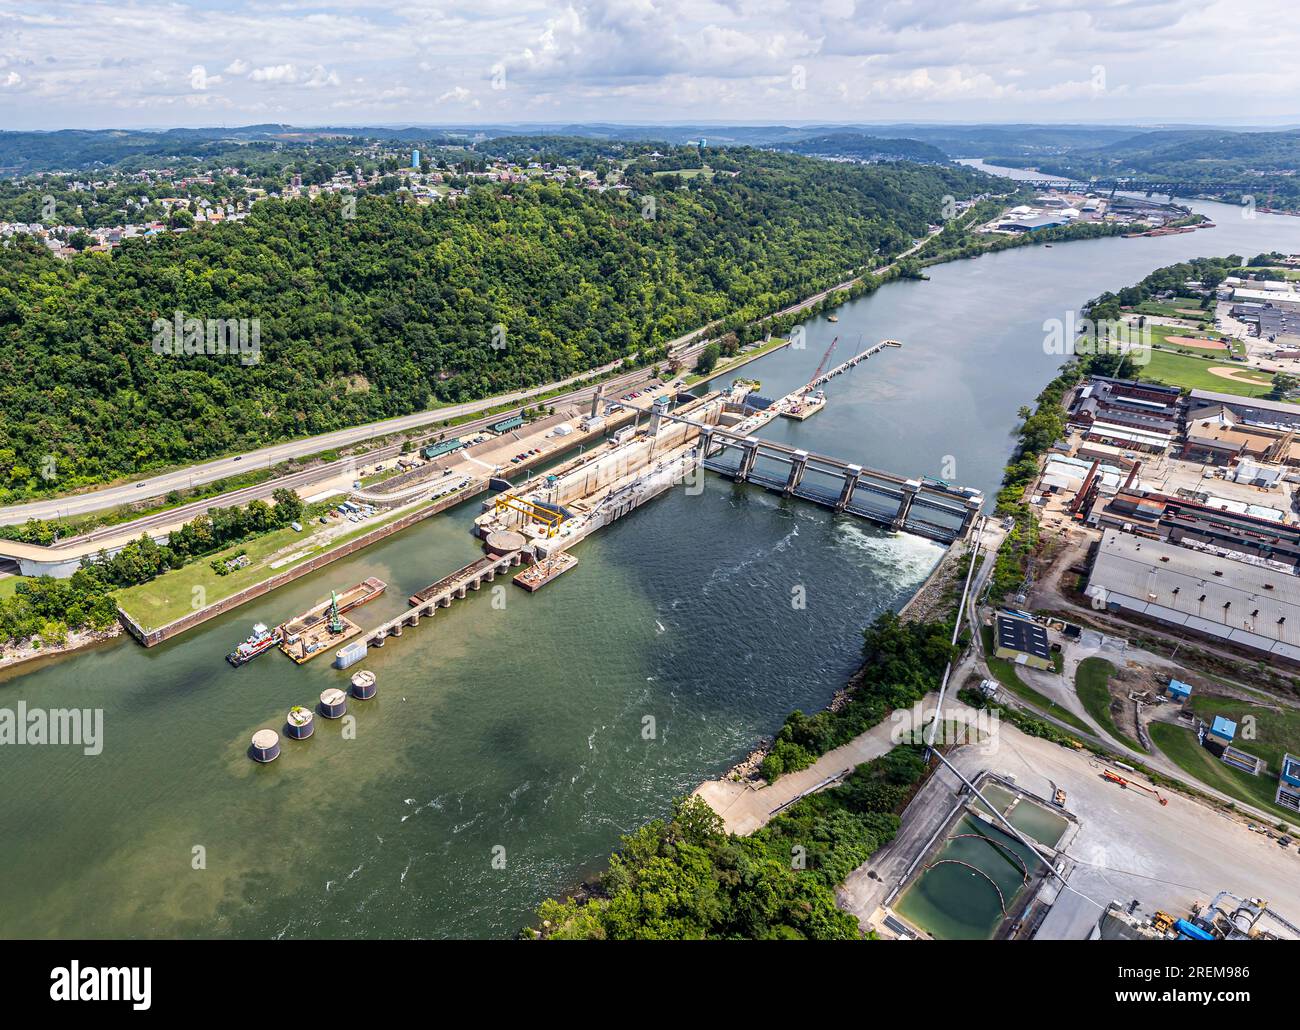 The photo above is an aerial view of Monongahela River Locks and Dam 4 near Charleroi, Pennsylvania, July 21, 2023. The facility is one of nine navigation structures on the Monongahela River that provide navigation from Fairmont, West Virginia, to downtown Pittsburgh. The U.S. Army Corps of Engineers started constructing the lock at Charleroi in 1931 and finished in 1932. The project became operational Aug. 14, 1932. The most recent construction at the facility began in 1994 to replace the main chamber with a new lock measuring 720 feet long and 84 feet wide. Charleroi is located at river mile Stock Photo